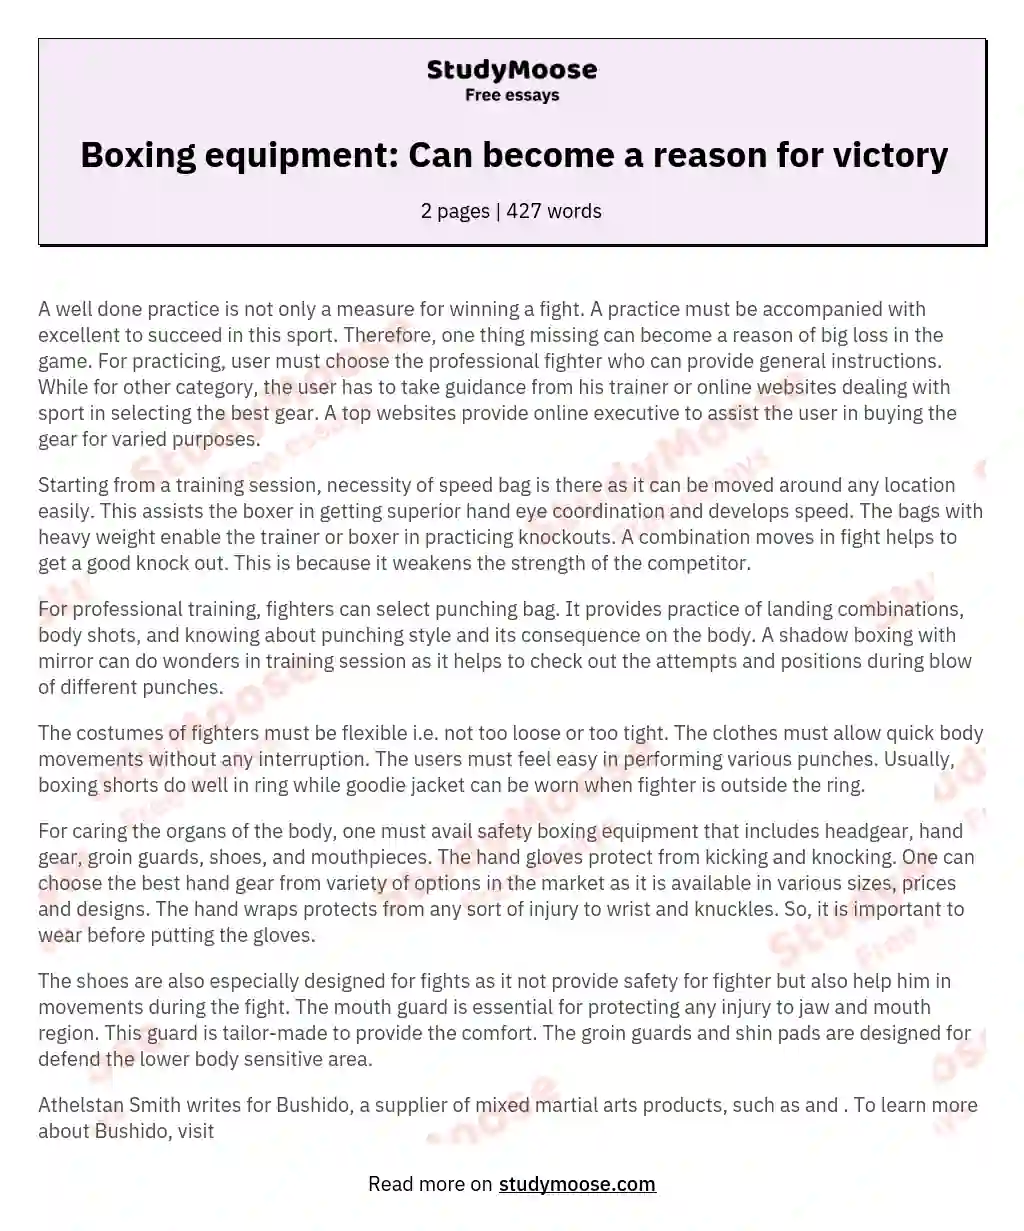 Boxing equipment: Can become a reason for victory